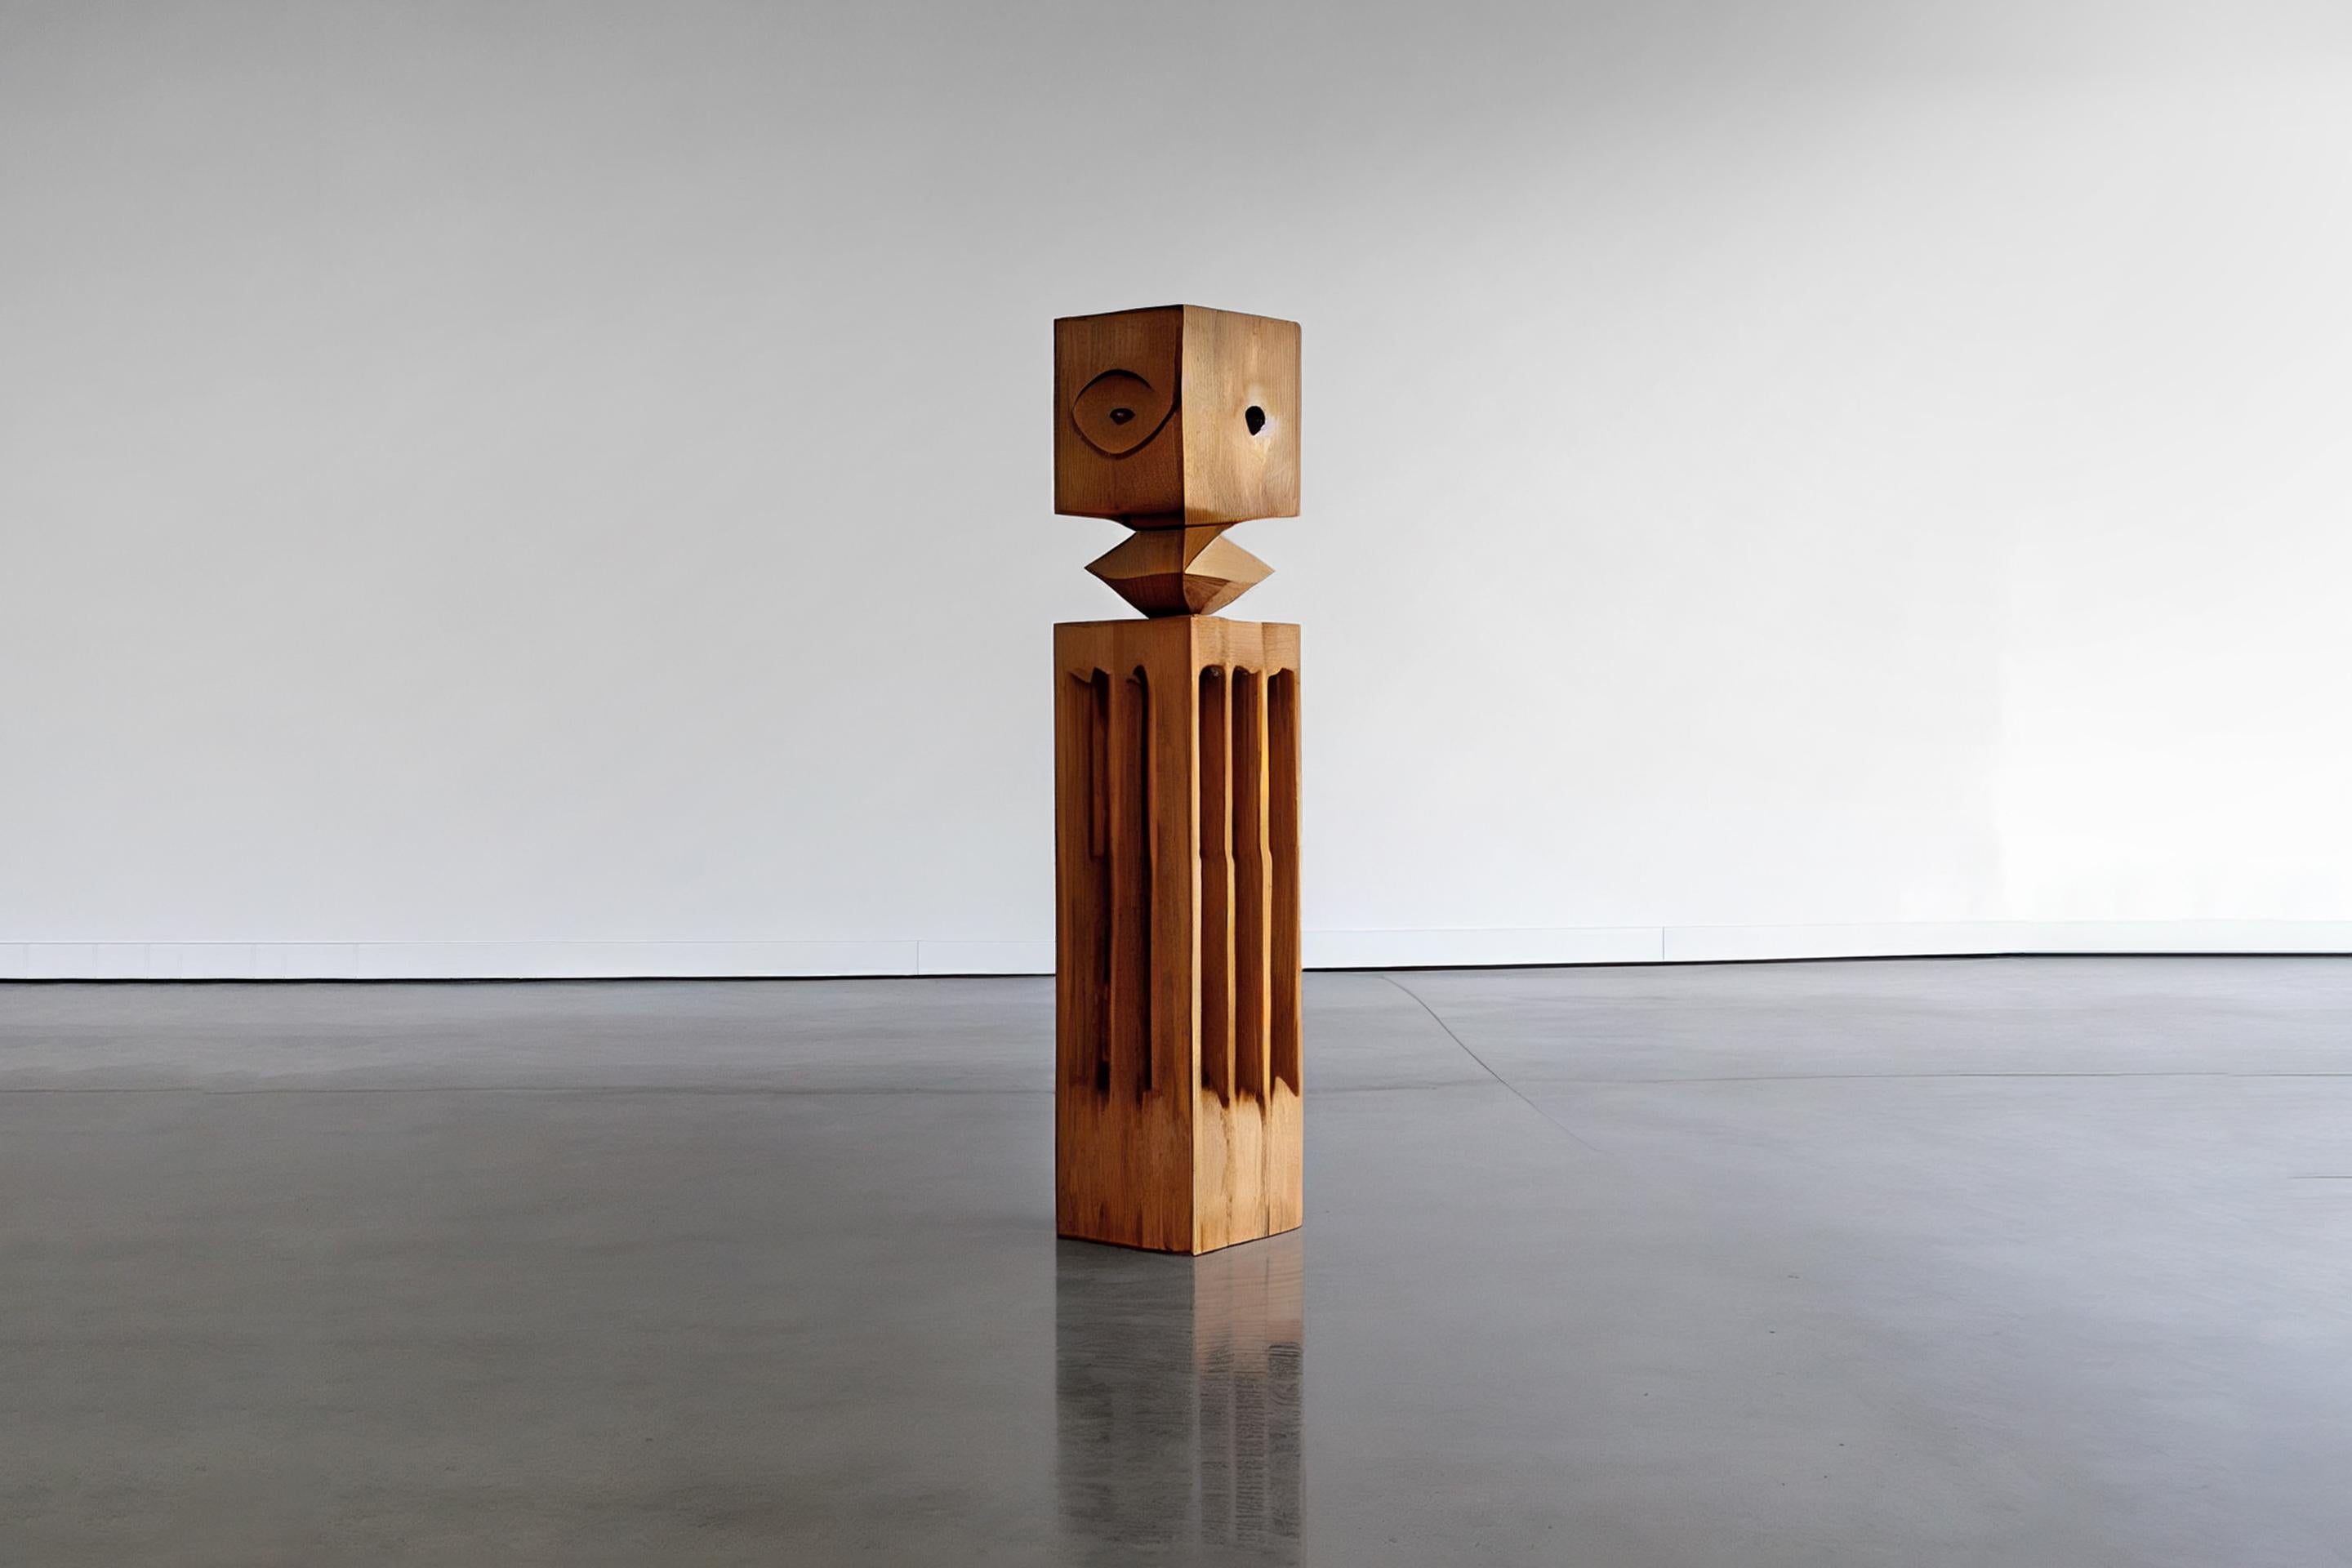 Figurative Wood Sculpture Inspired in Constantin Brancusi art, 3 Kings by NONO.

NONO furniture company introduces the 3 kings, a set of three monumental totems inspired by the works of Constantin Brancusi.
 
The 3 kings are a handcrafted figurative